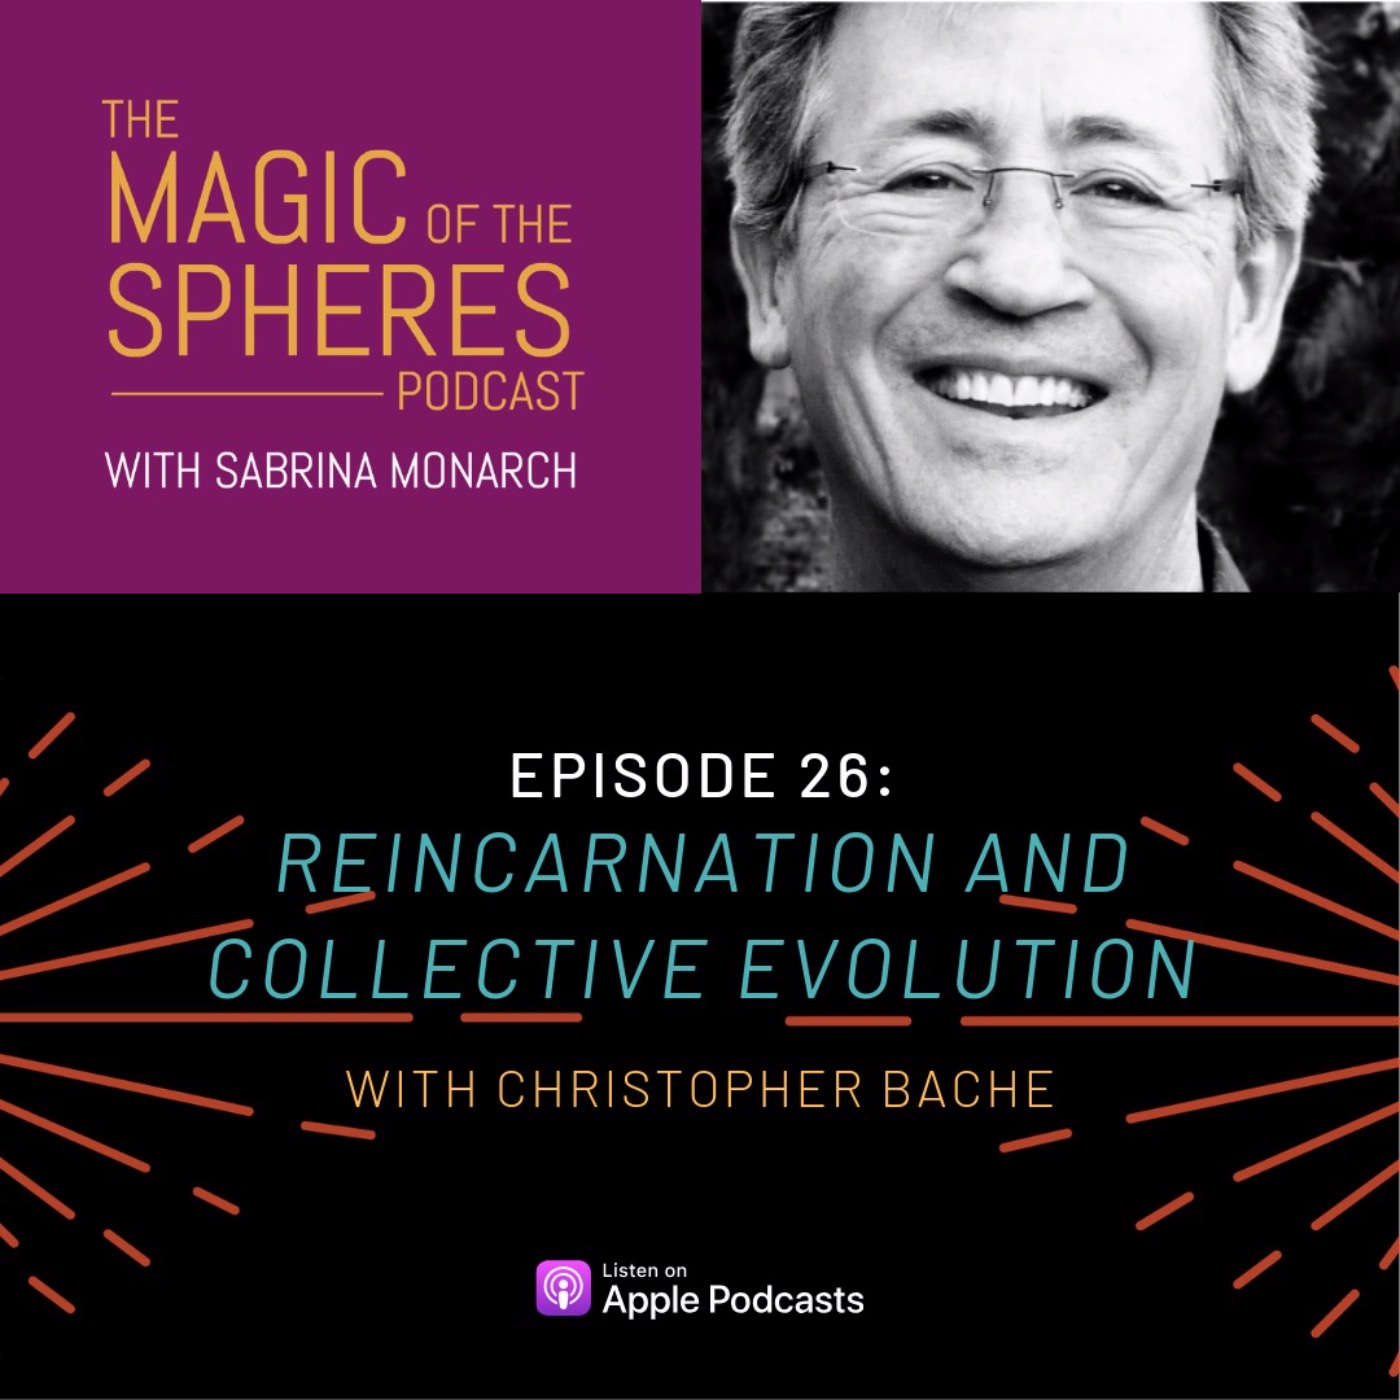 Reincarnation and Collective Evolution with Chris M. Bache